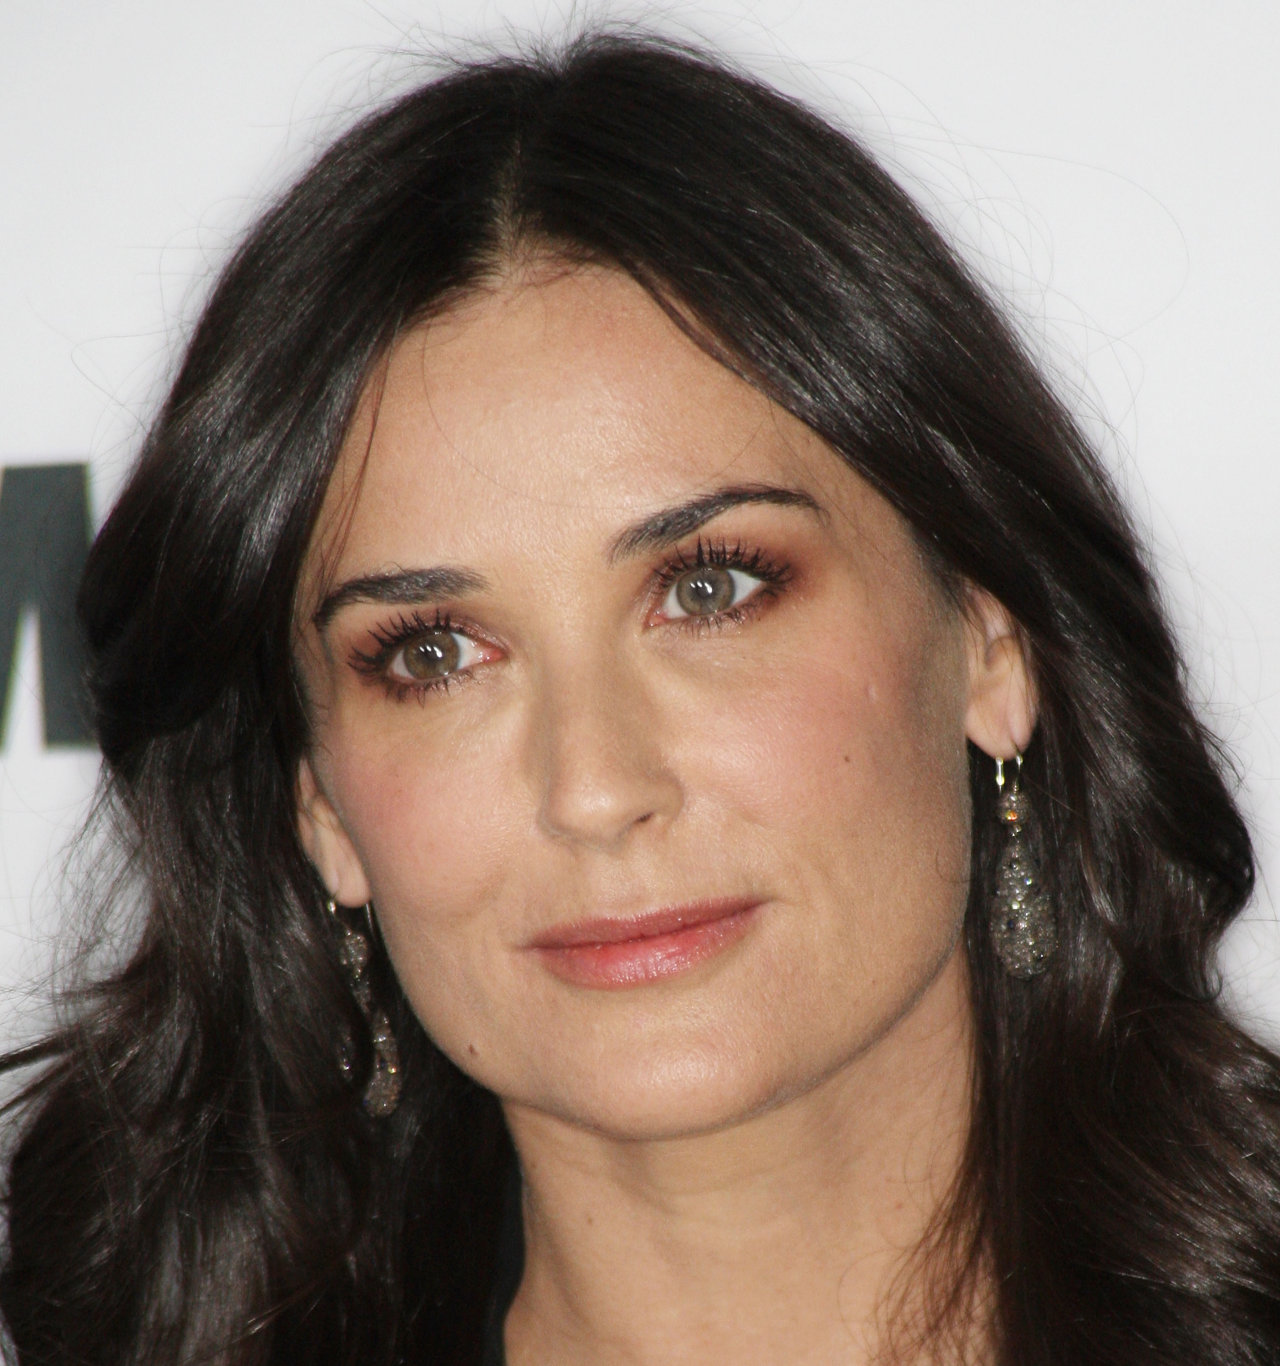 Demi Moore leaked wallpapers